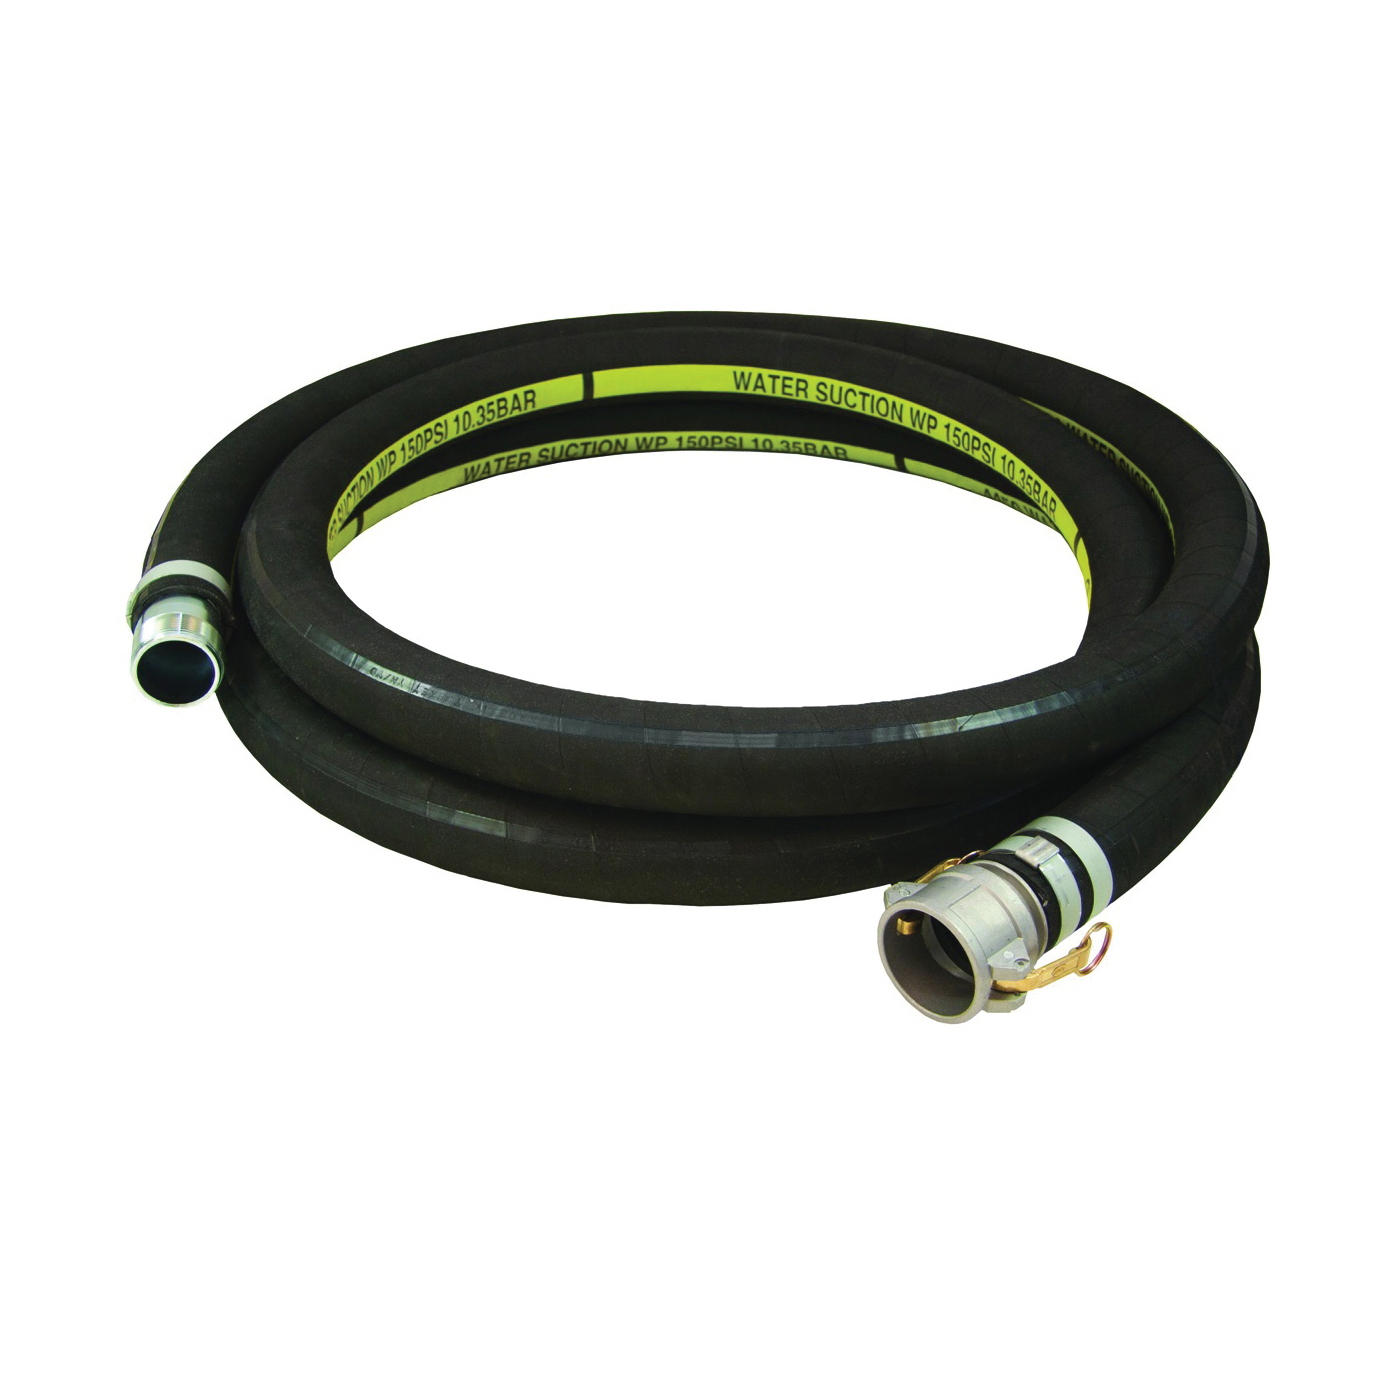 1210-2000-20-CN Water Suction Hose, 2 in ID, 20 ft L, Camlock Female x MNPT, EPDM Rubber